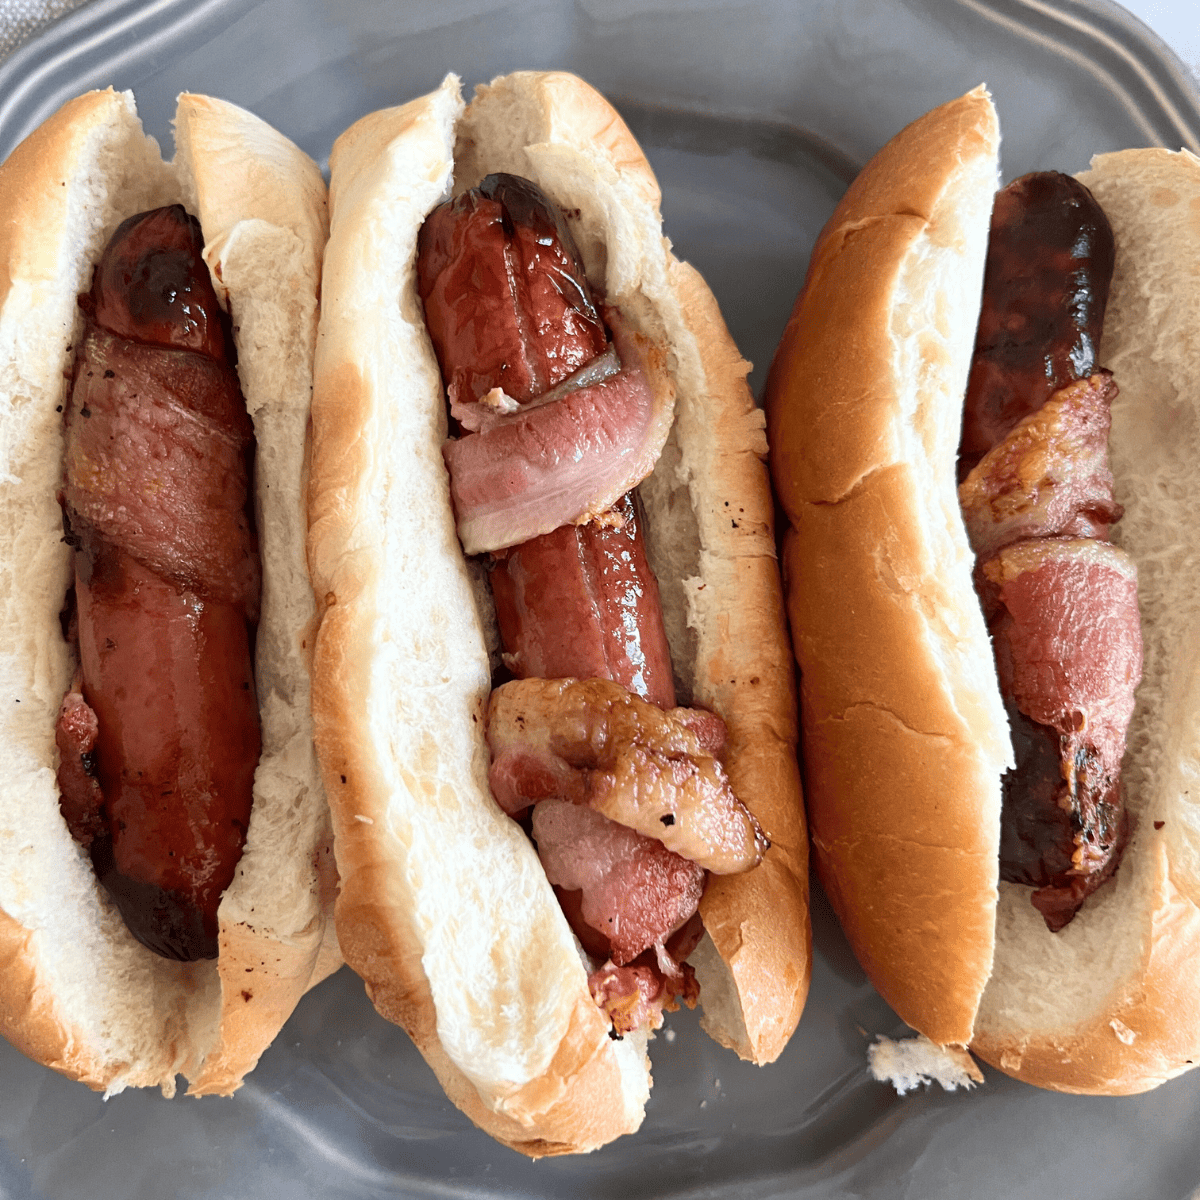 How do you make a hot dog taste even better? Wrap it in some bacon of course! This bacon-wrapped hot dog is the best hot dog you will ever eat. 